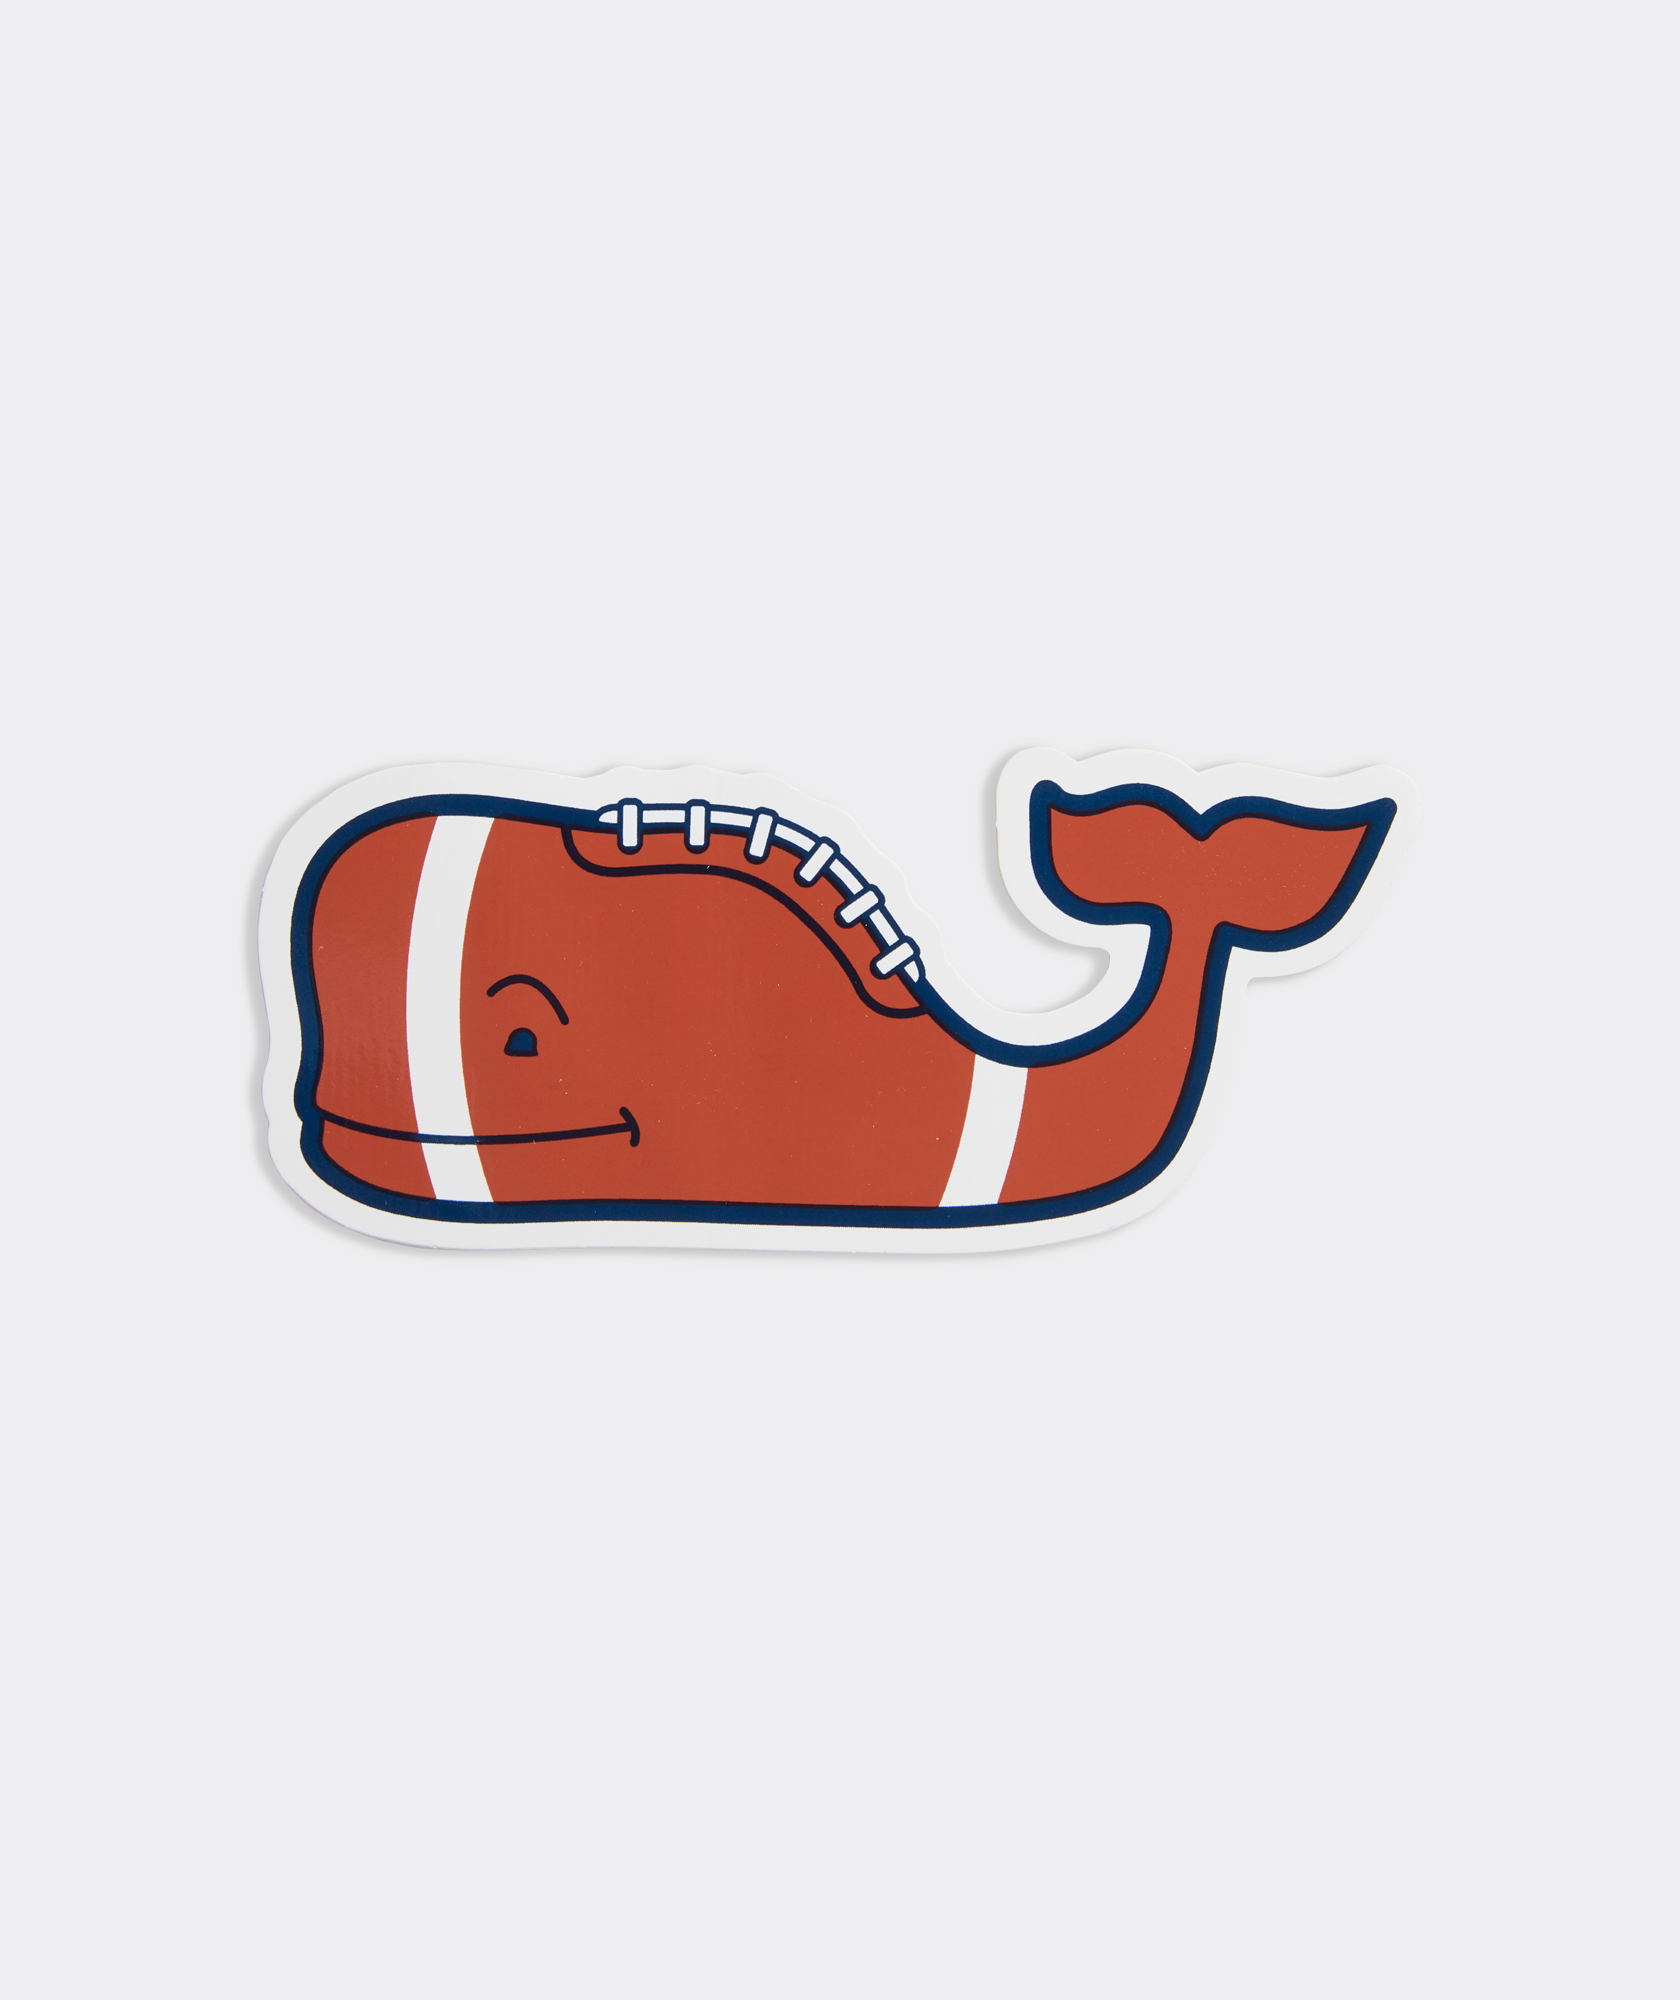 Download look Stylish And Feel Great With Vineyard Vines Wallpaper   Wallpaperscom